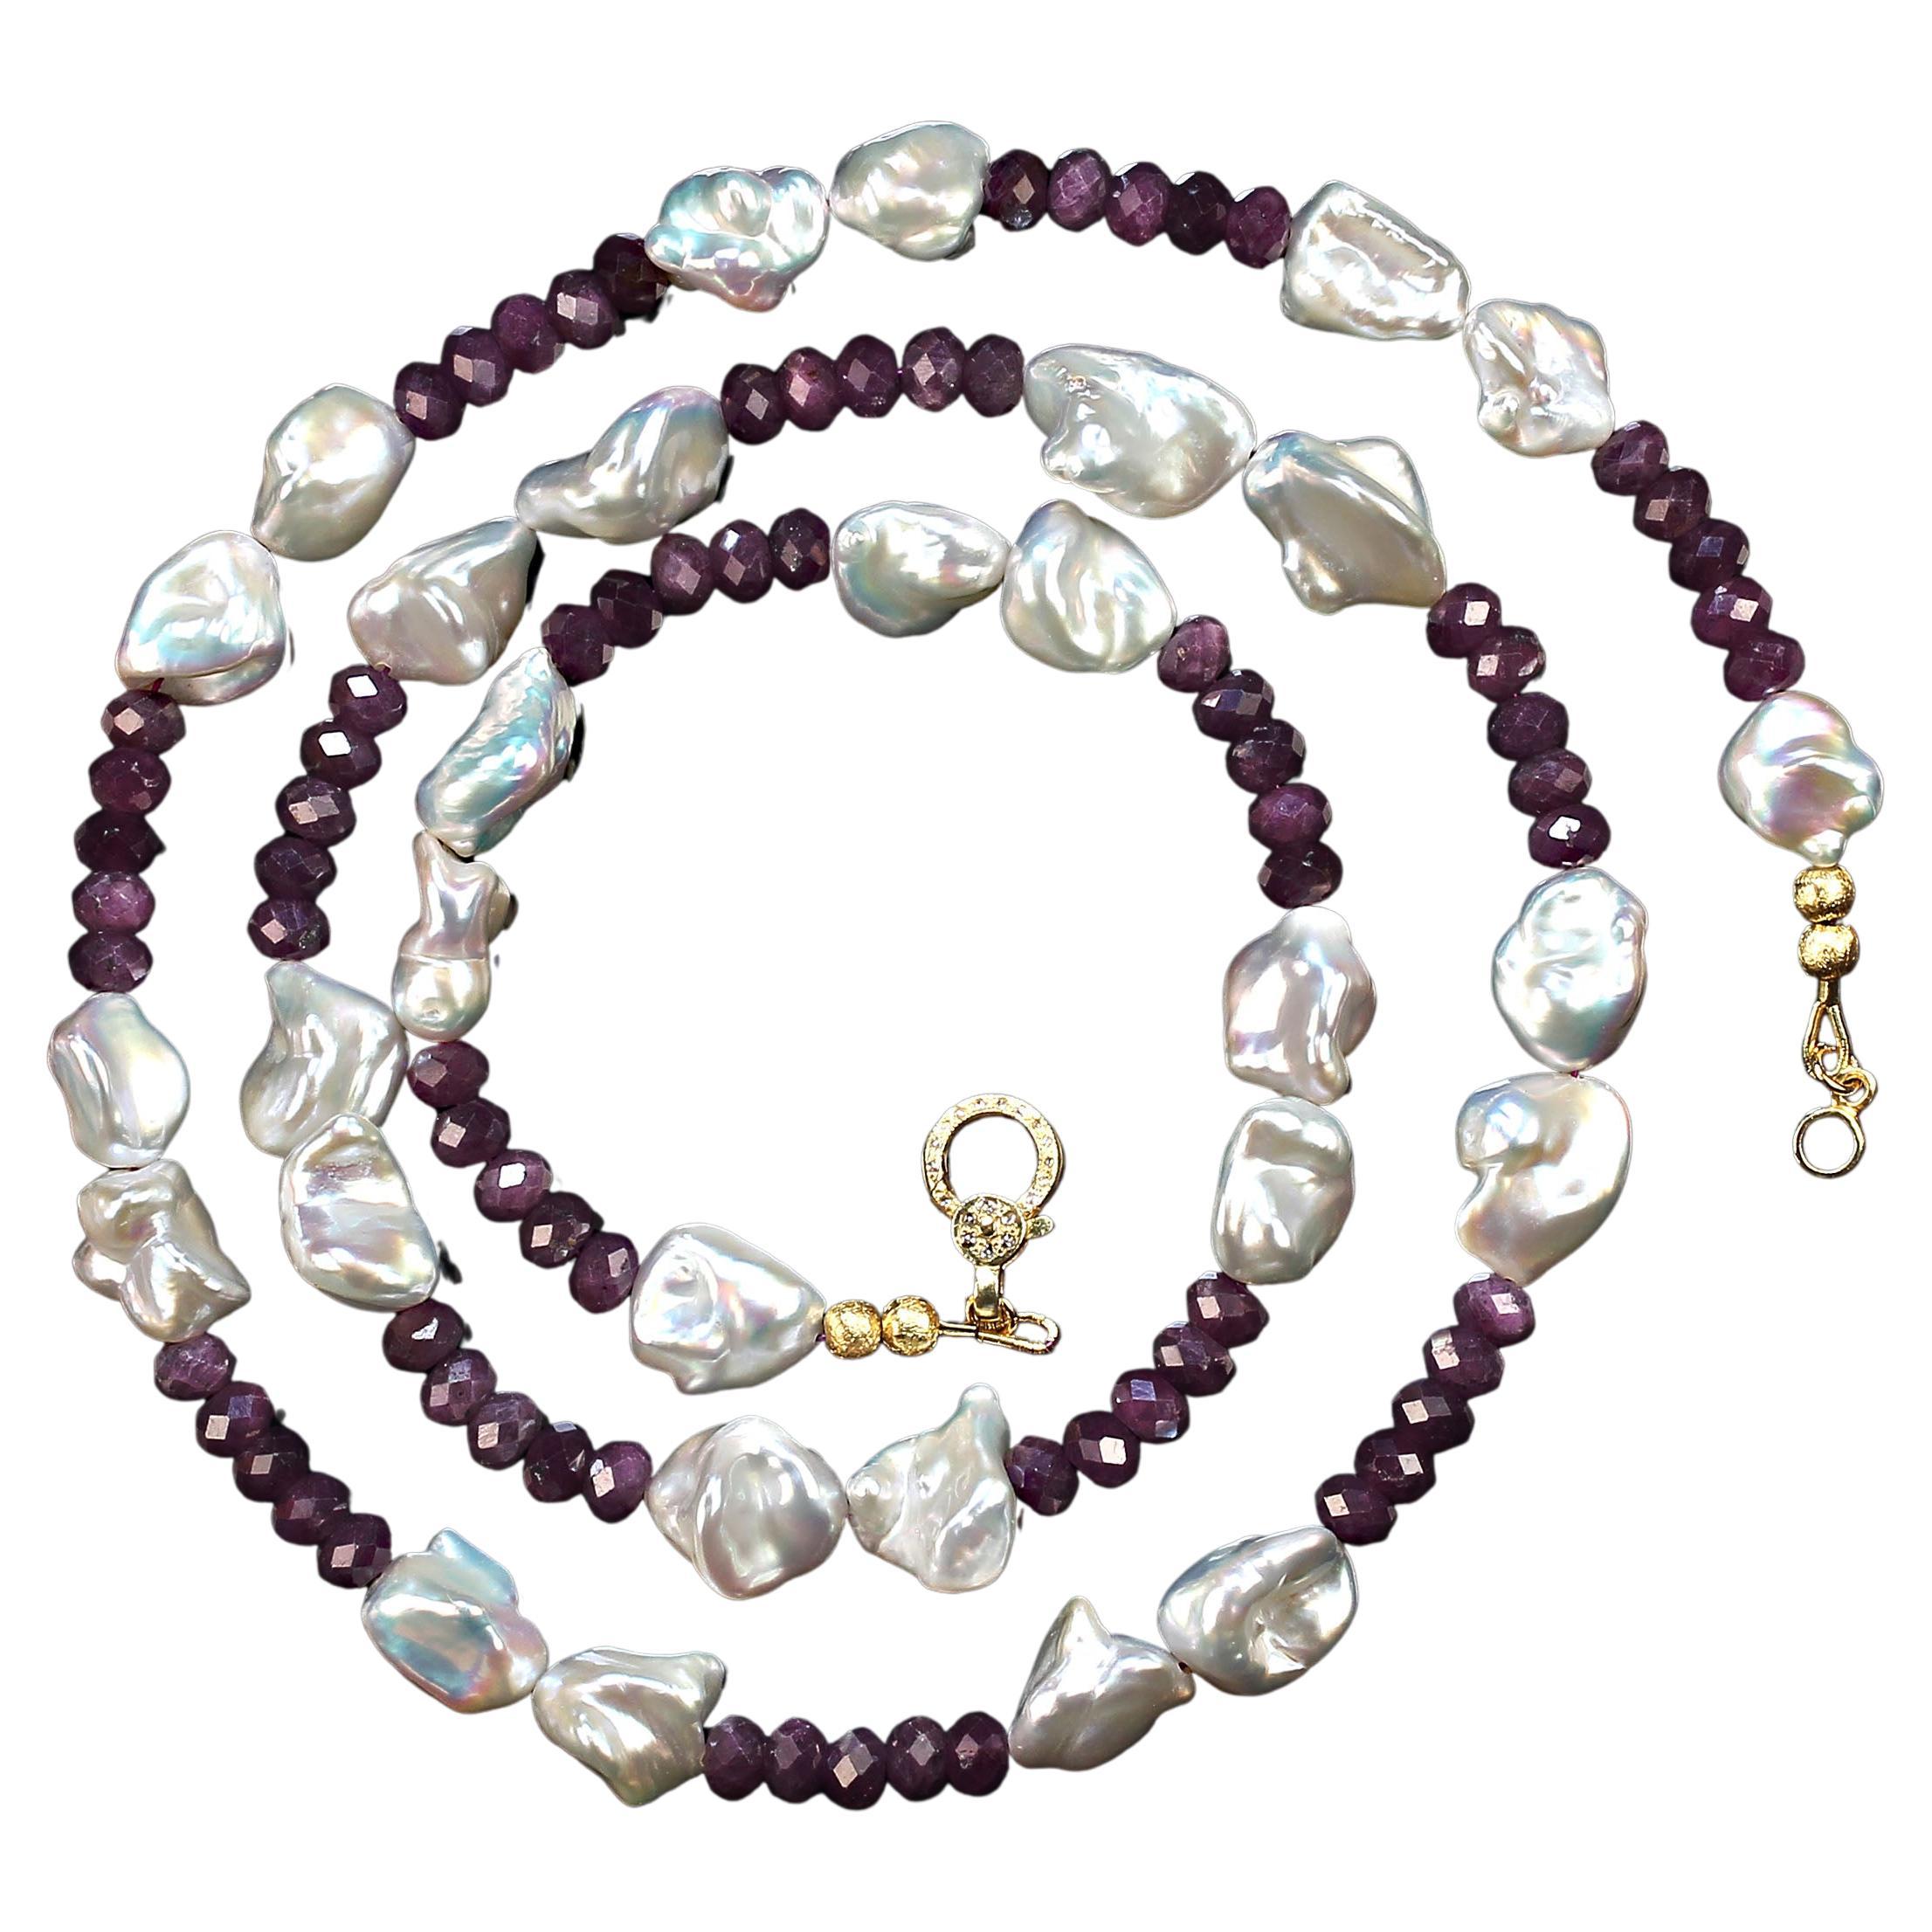 Women's or Men's AJD 30 Inch Unique White Pearl and Ruby Necklace    Great Gift! For Sale